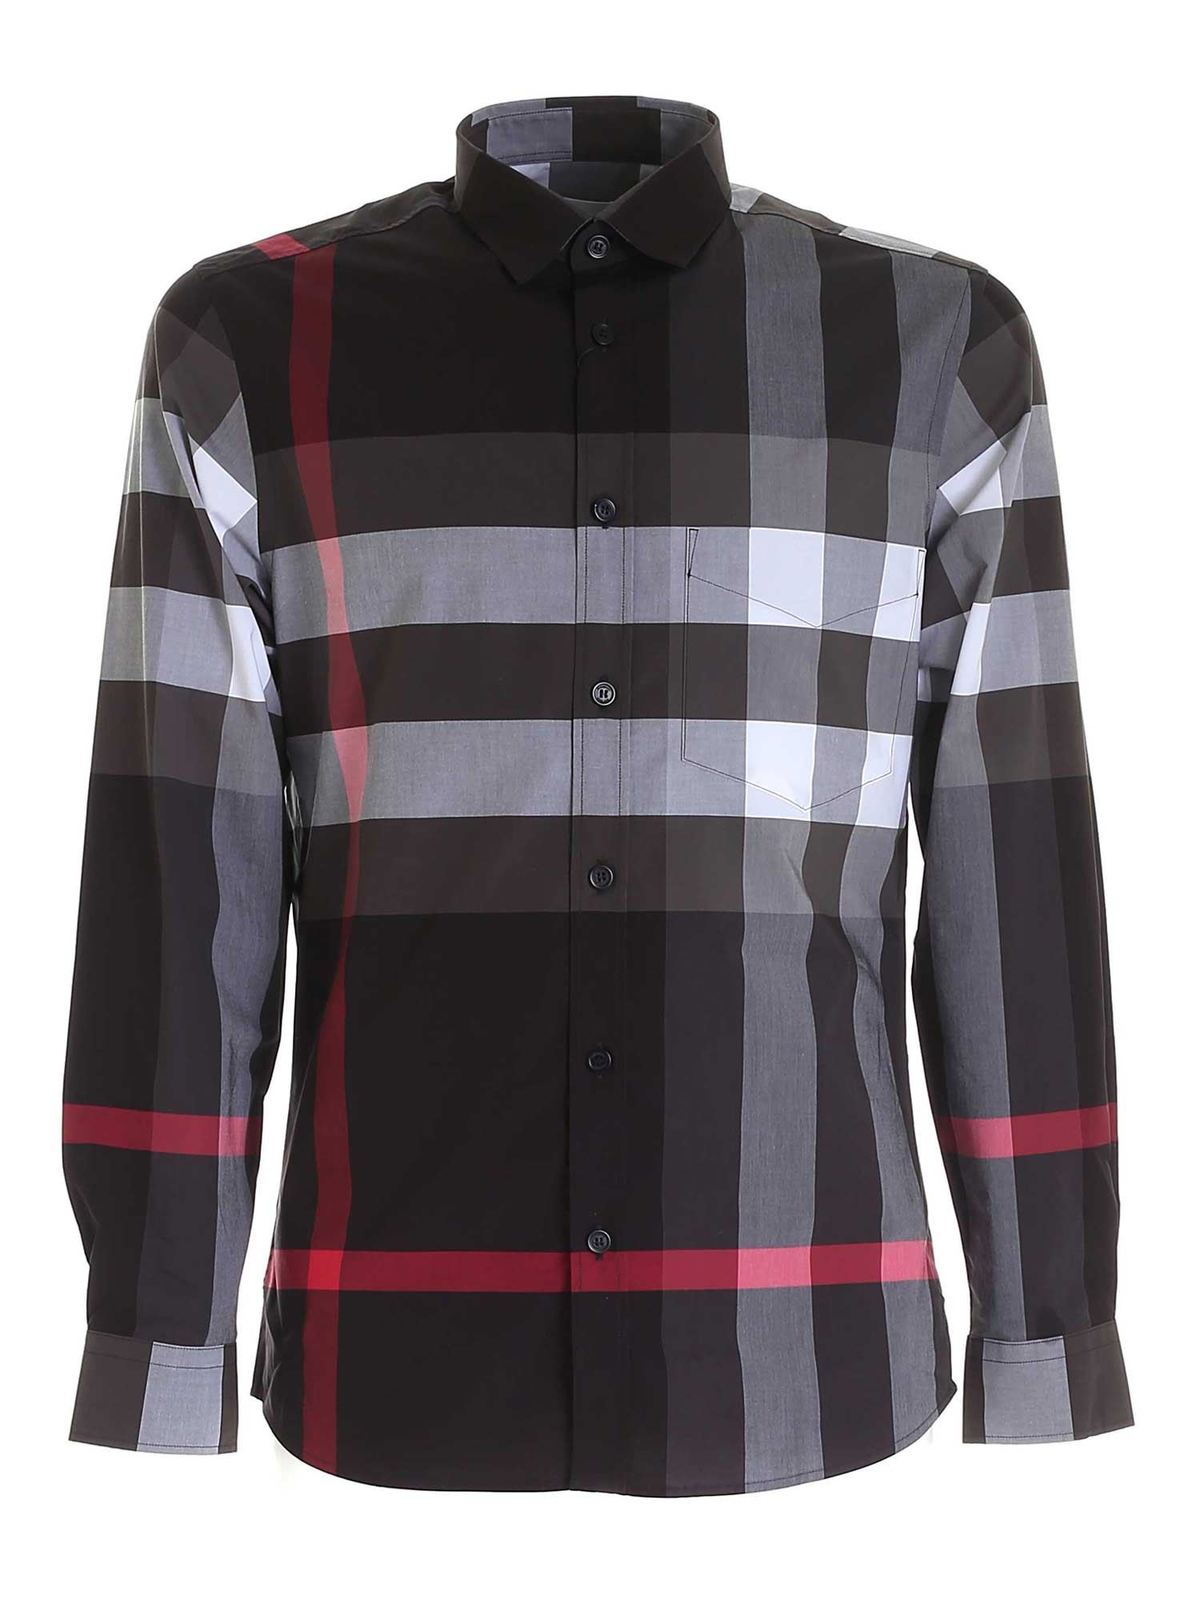 Burberry - Somerton shirt in black white and red - shirts - 8023772